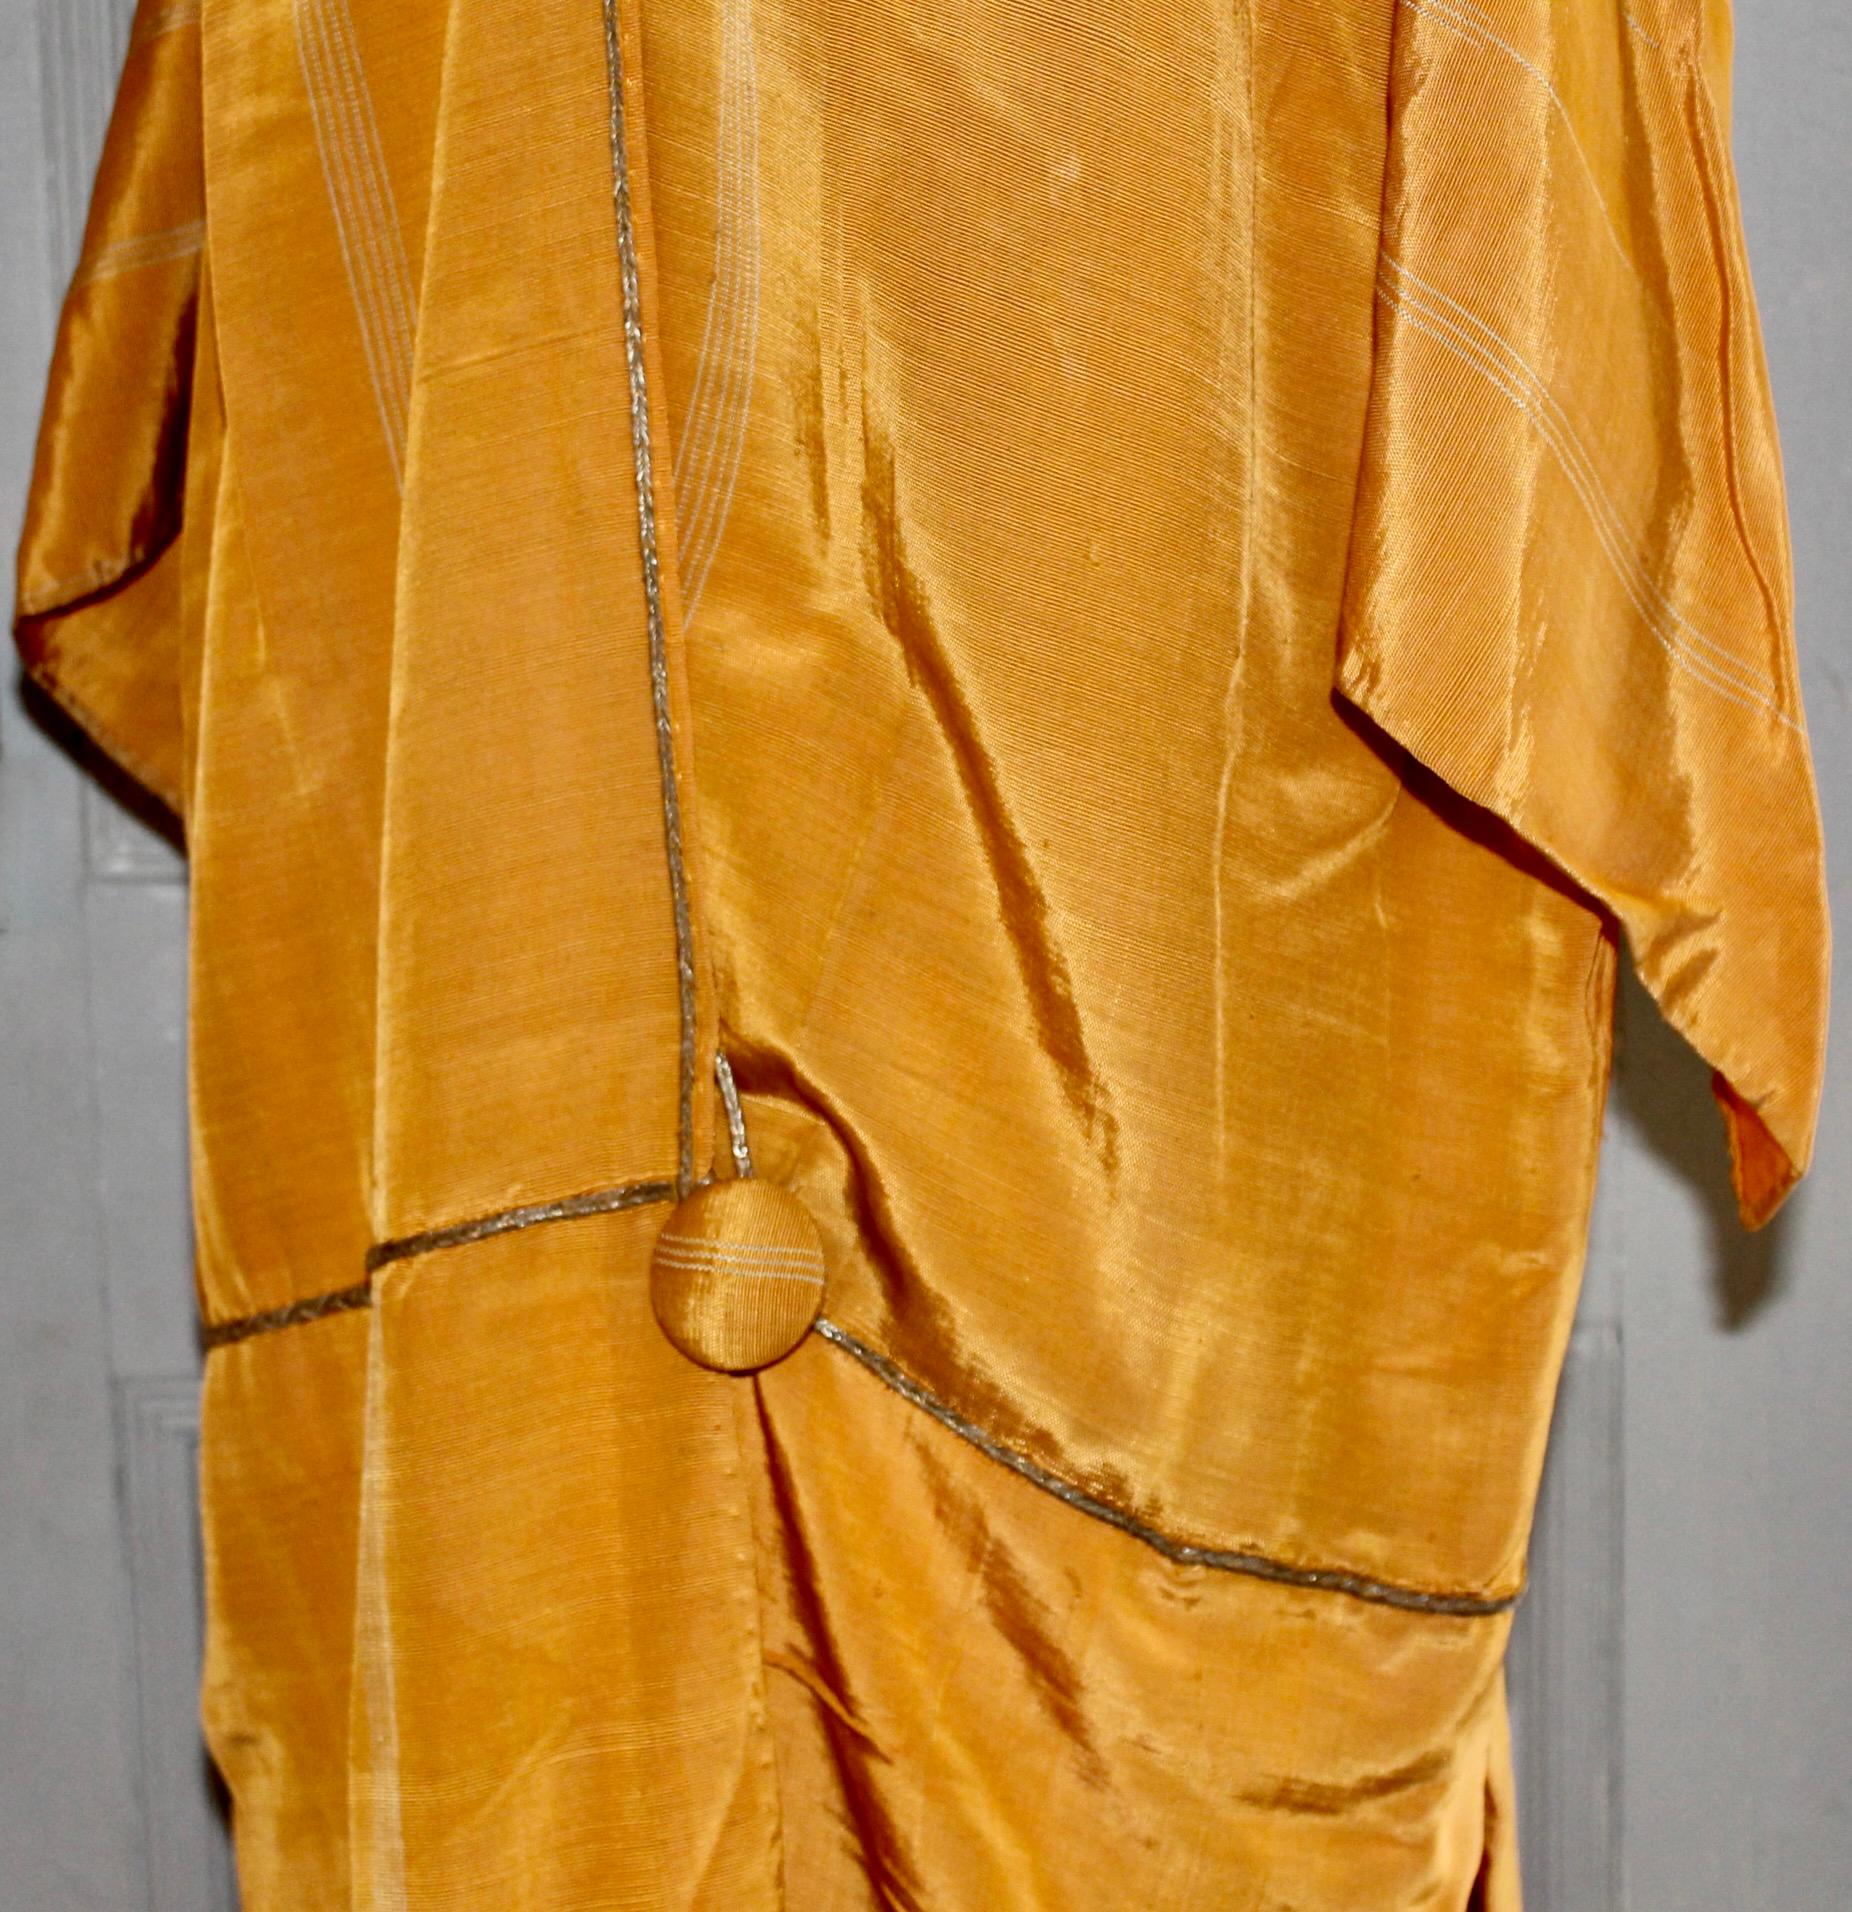 Abayah as a Dress, manner of Poiret For Sale 4